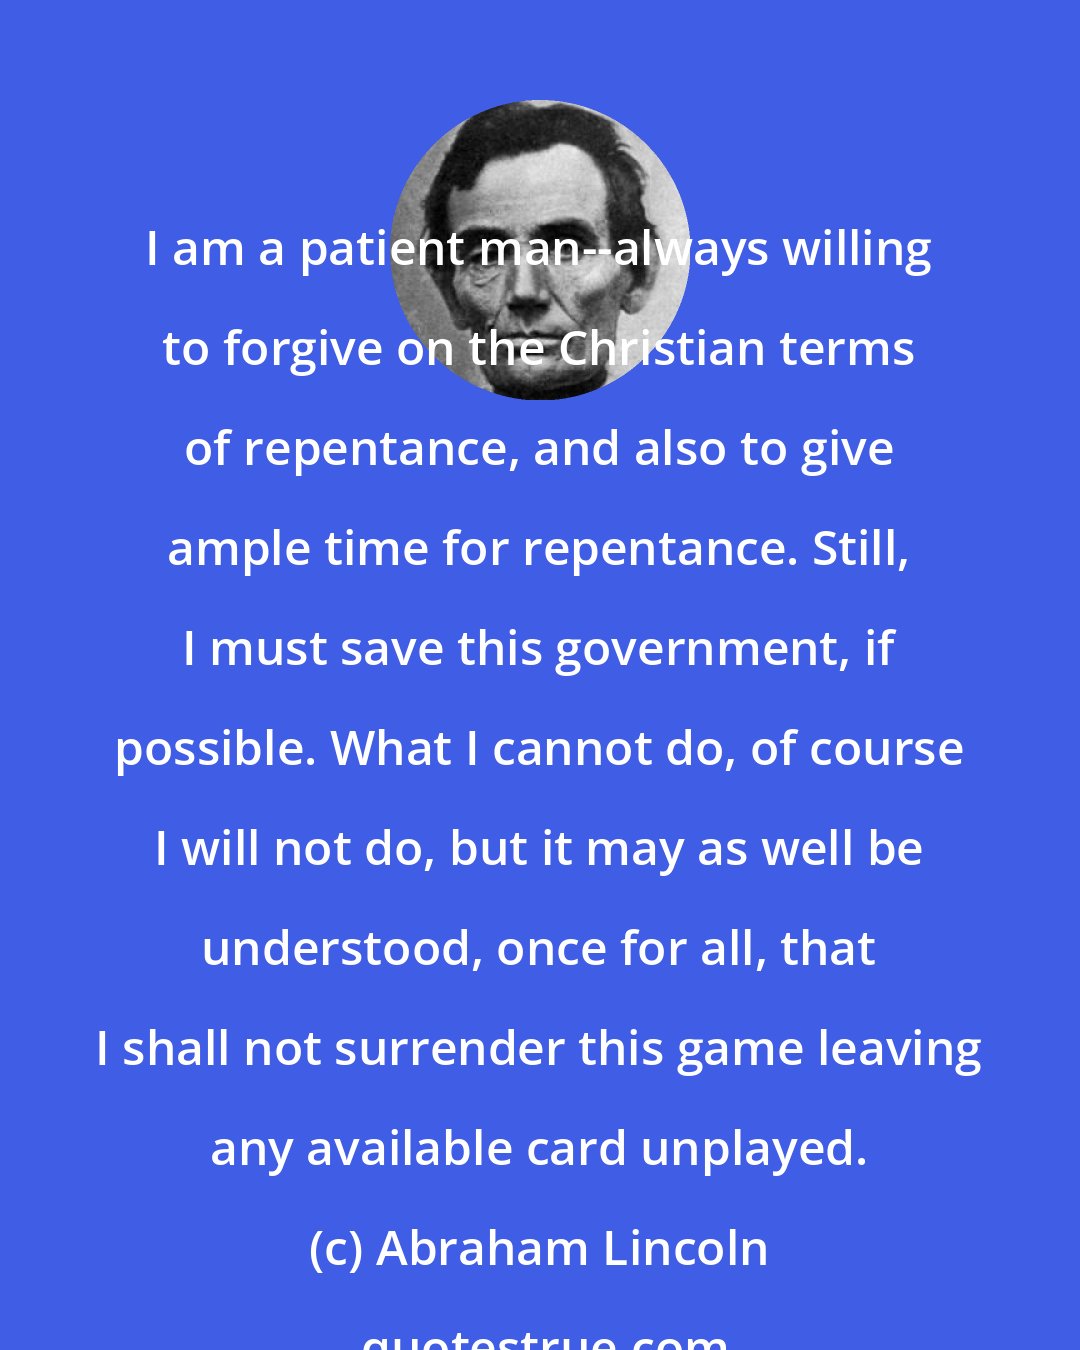 Abraham Lincoln: I am a patient man--always willing to forgive on the Christian terms of repentance, and also to give ample time for repentance. Still, I must save this government, if possible. What I cannot do, of course I will not do, but it may as well be understood, once for all, that I shall not surrender this game leaving any available card unplayed.